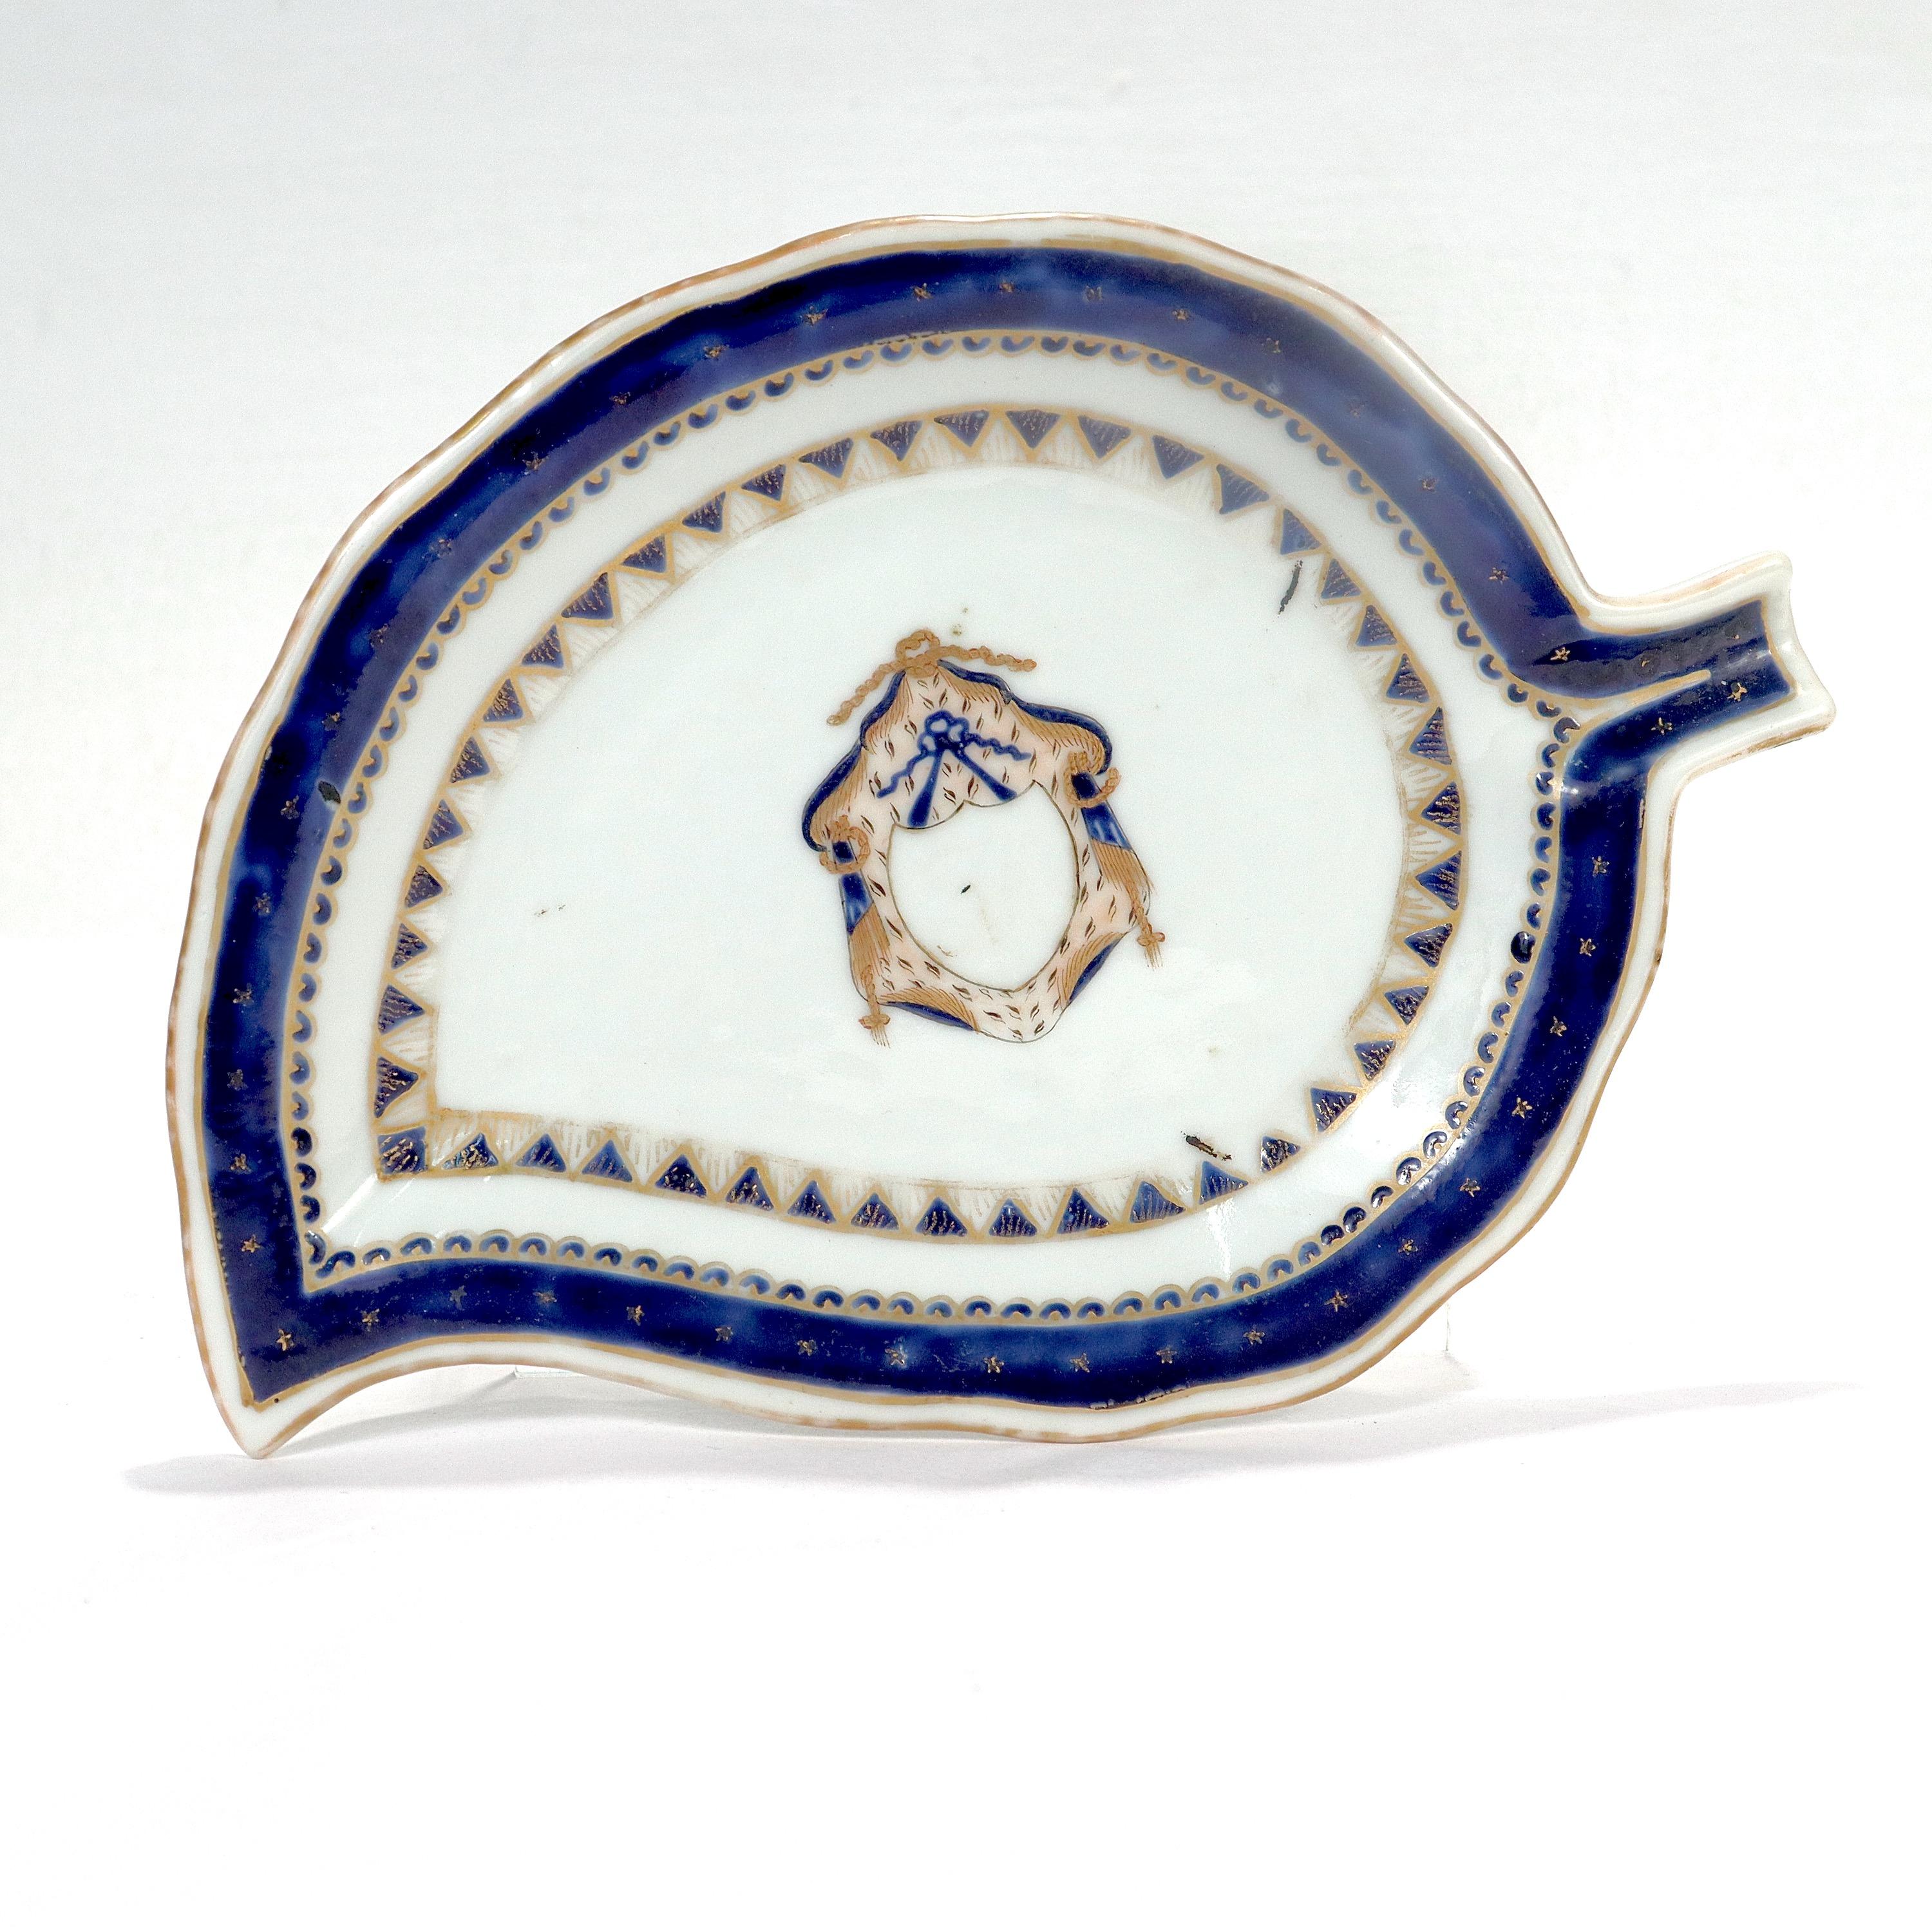 A fine antique Chinese porcelain leaf dish or plate.

In the form of a tobacco leaf with a heraldic crest to the center & colbalt blue decoration with gilt highlights throughout.

Simply a great piece of Chinese Export Porcelain!

Date:
19th